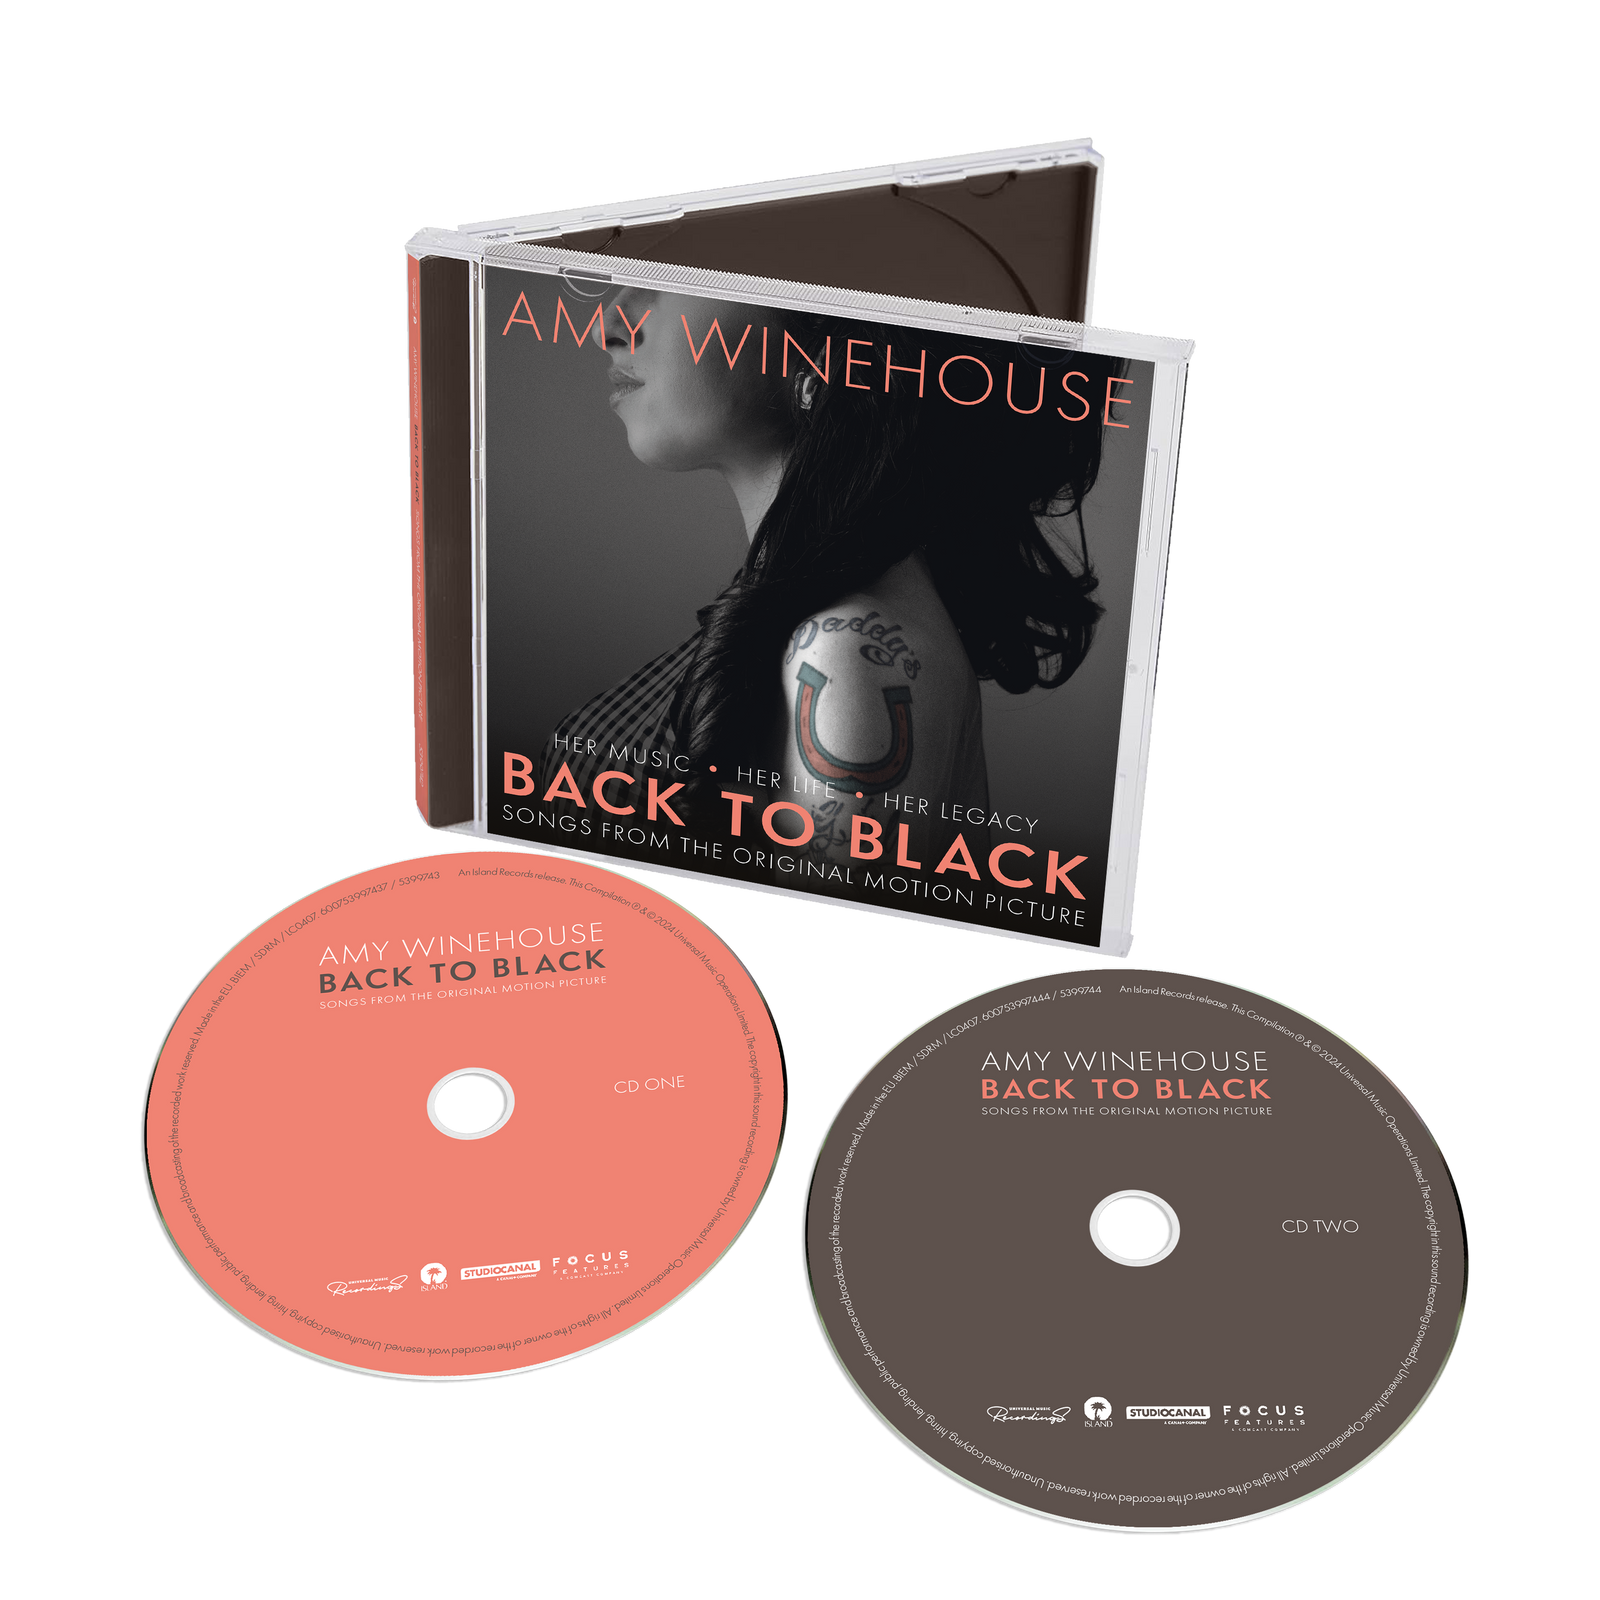 CD Shop - OST BACK TO BLACK: MUSIC FROM THE ORIGINAL MOTION PICTURE